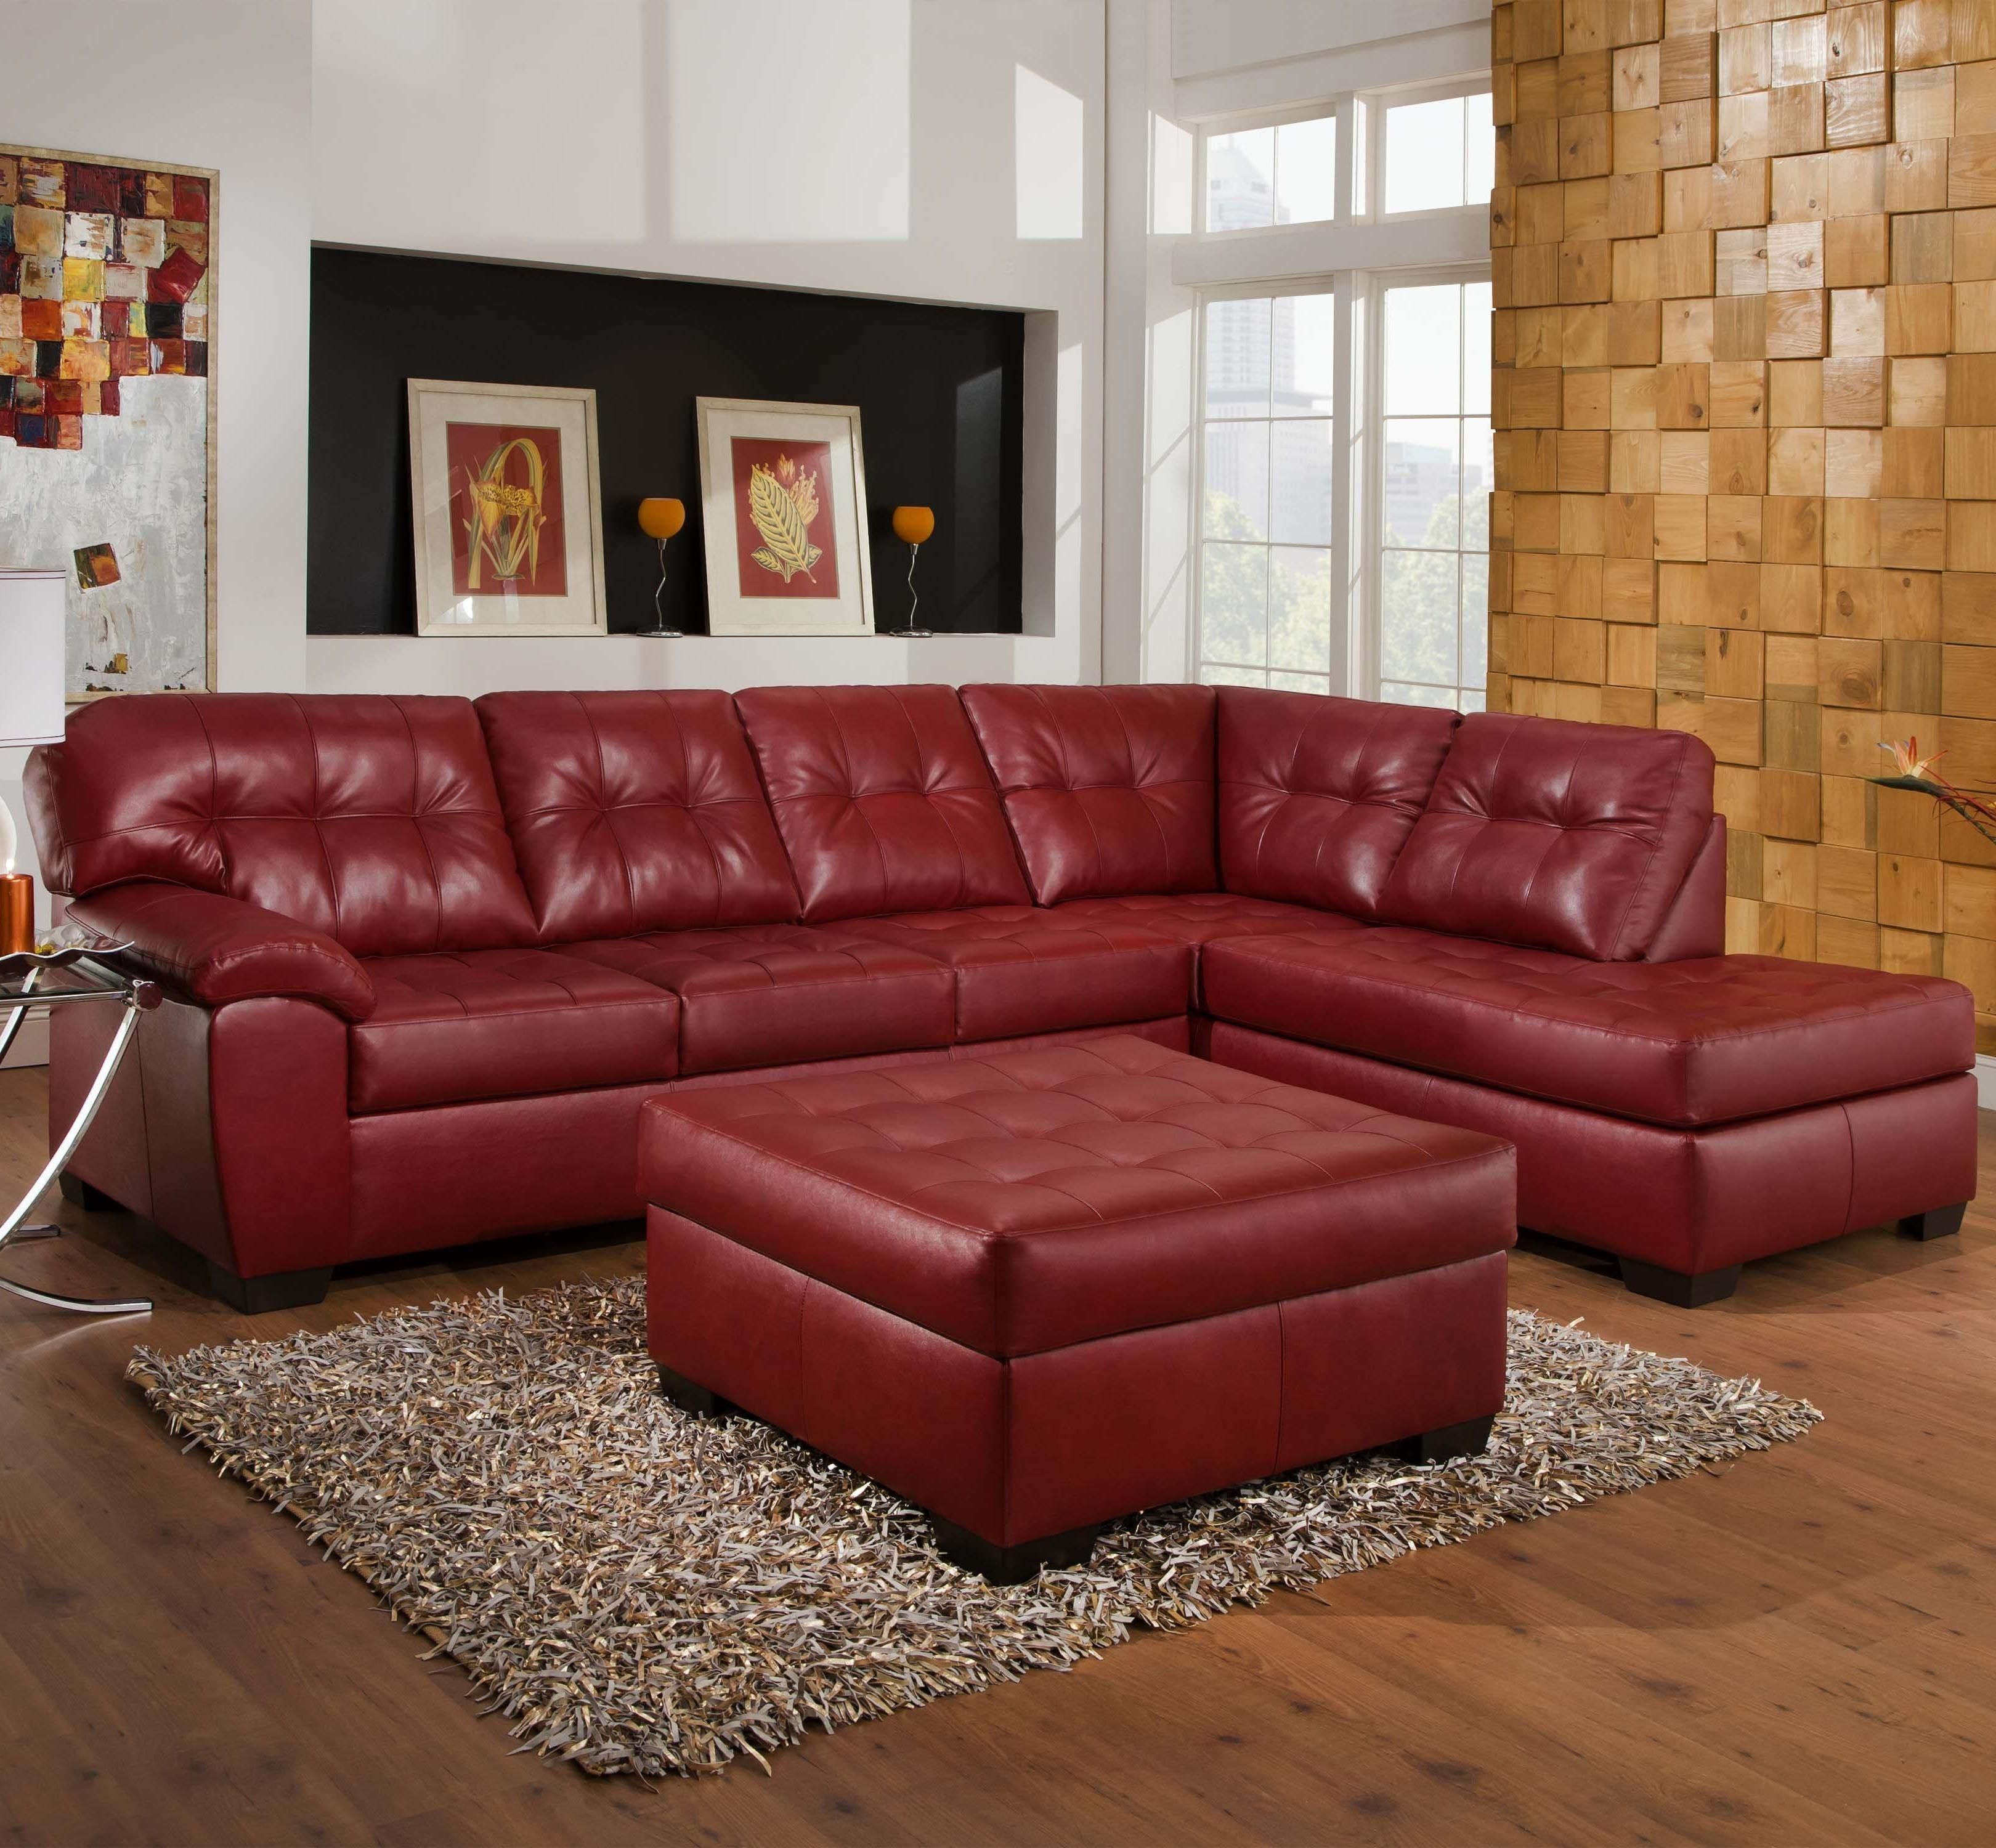 9569 2 Piece Sectional With Tufted Seats & Backsimmons Within Simmons Chaise Sofas (View 3 of 10)